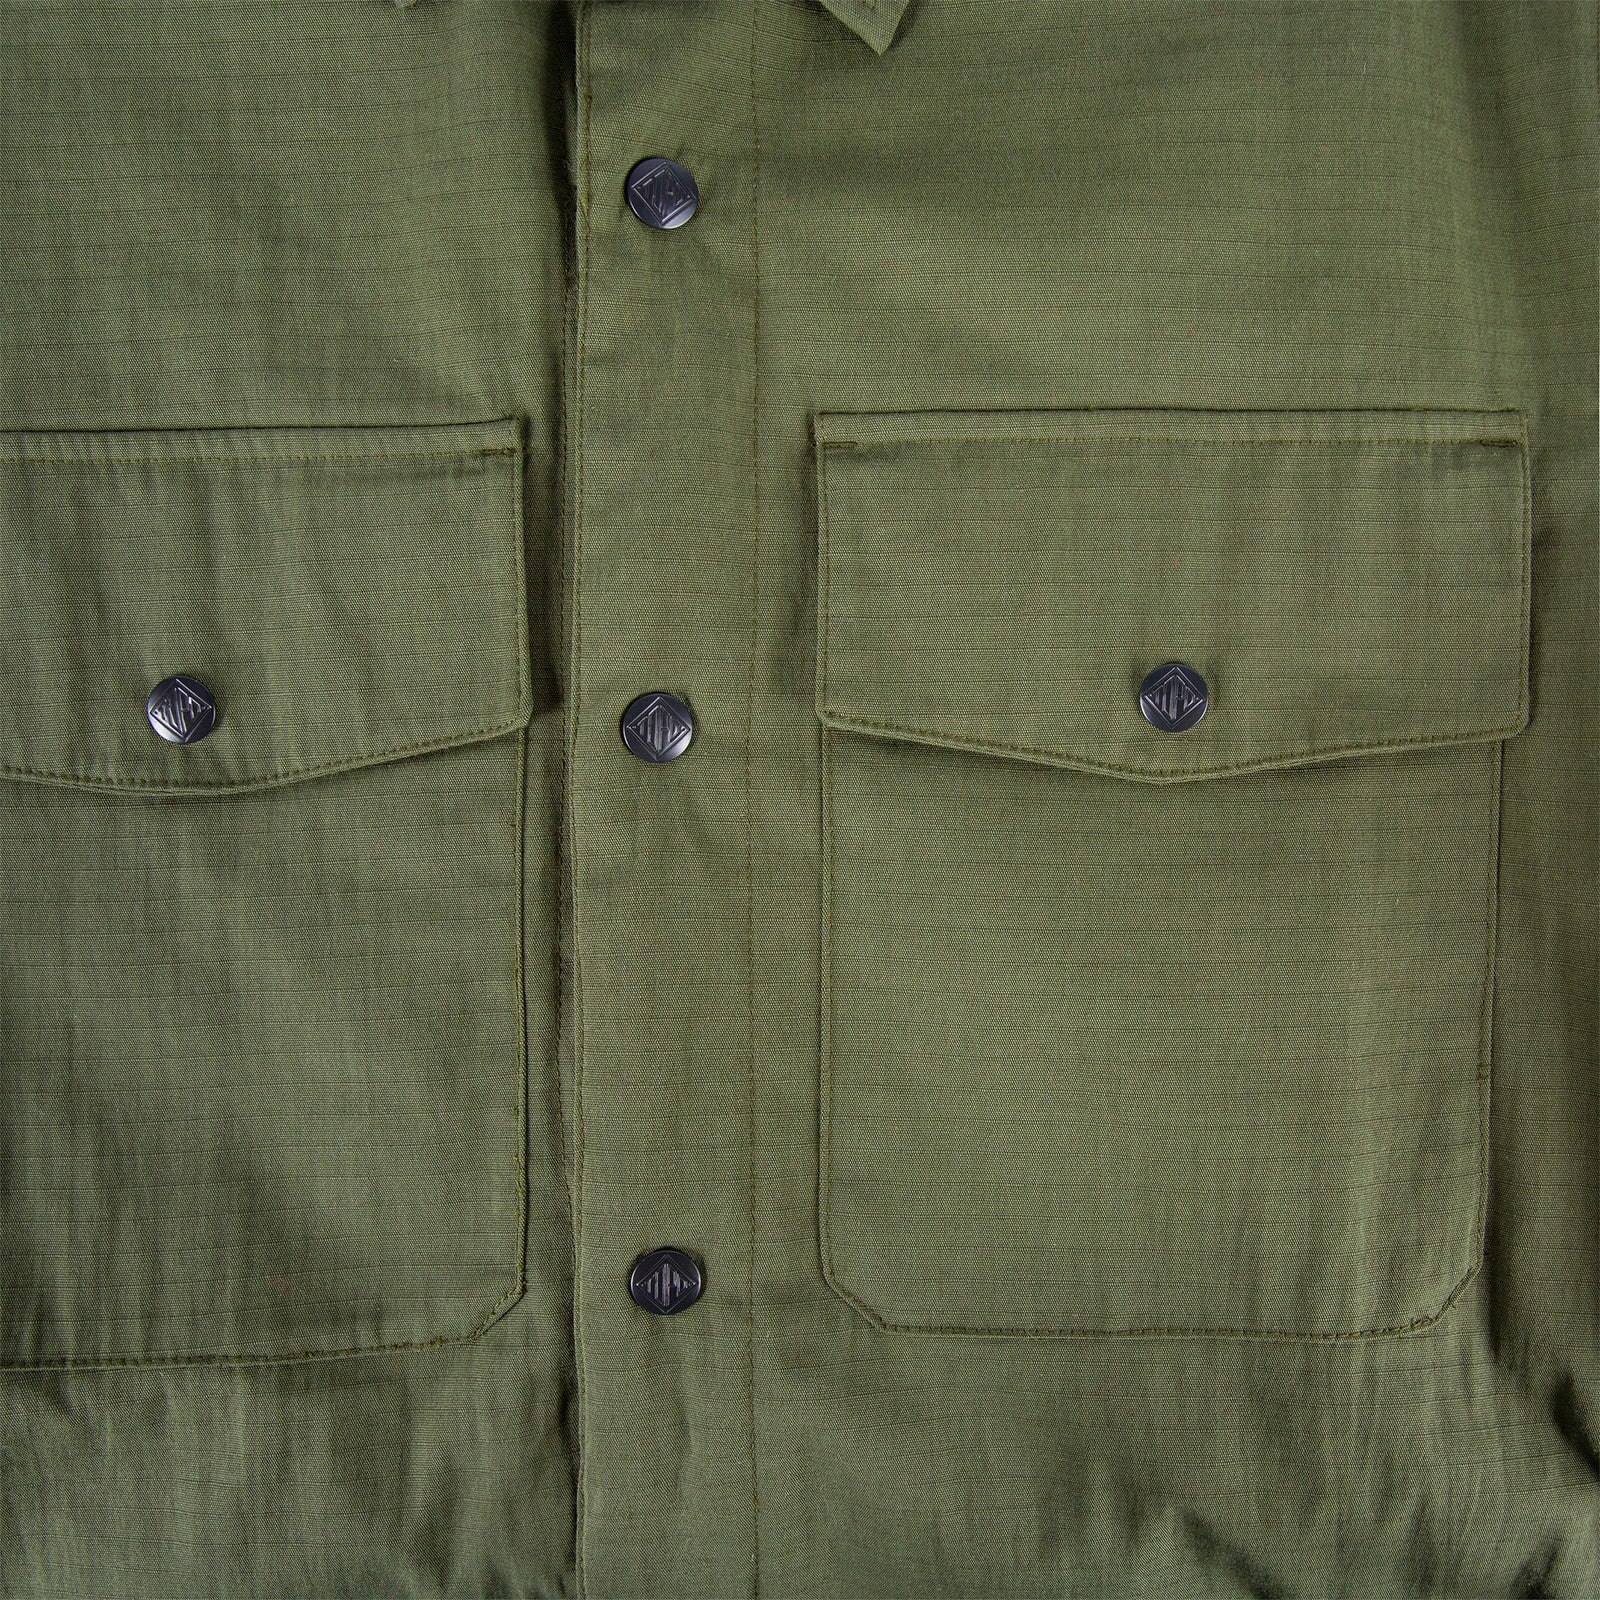 General front detail shot of Men's Topo Designs Insulated Shirt Jacket in Olive green showing chest pockets and buttons.